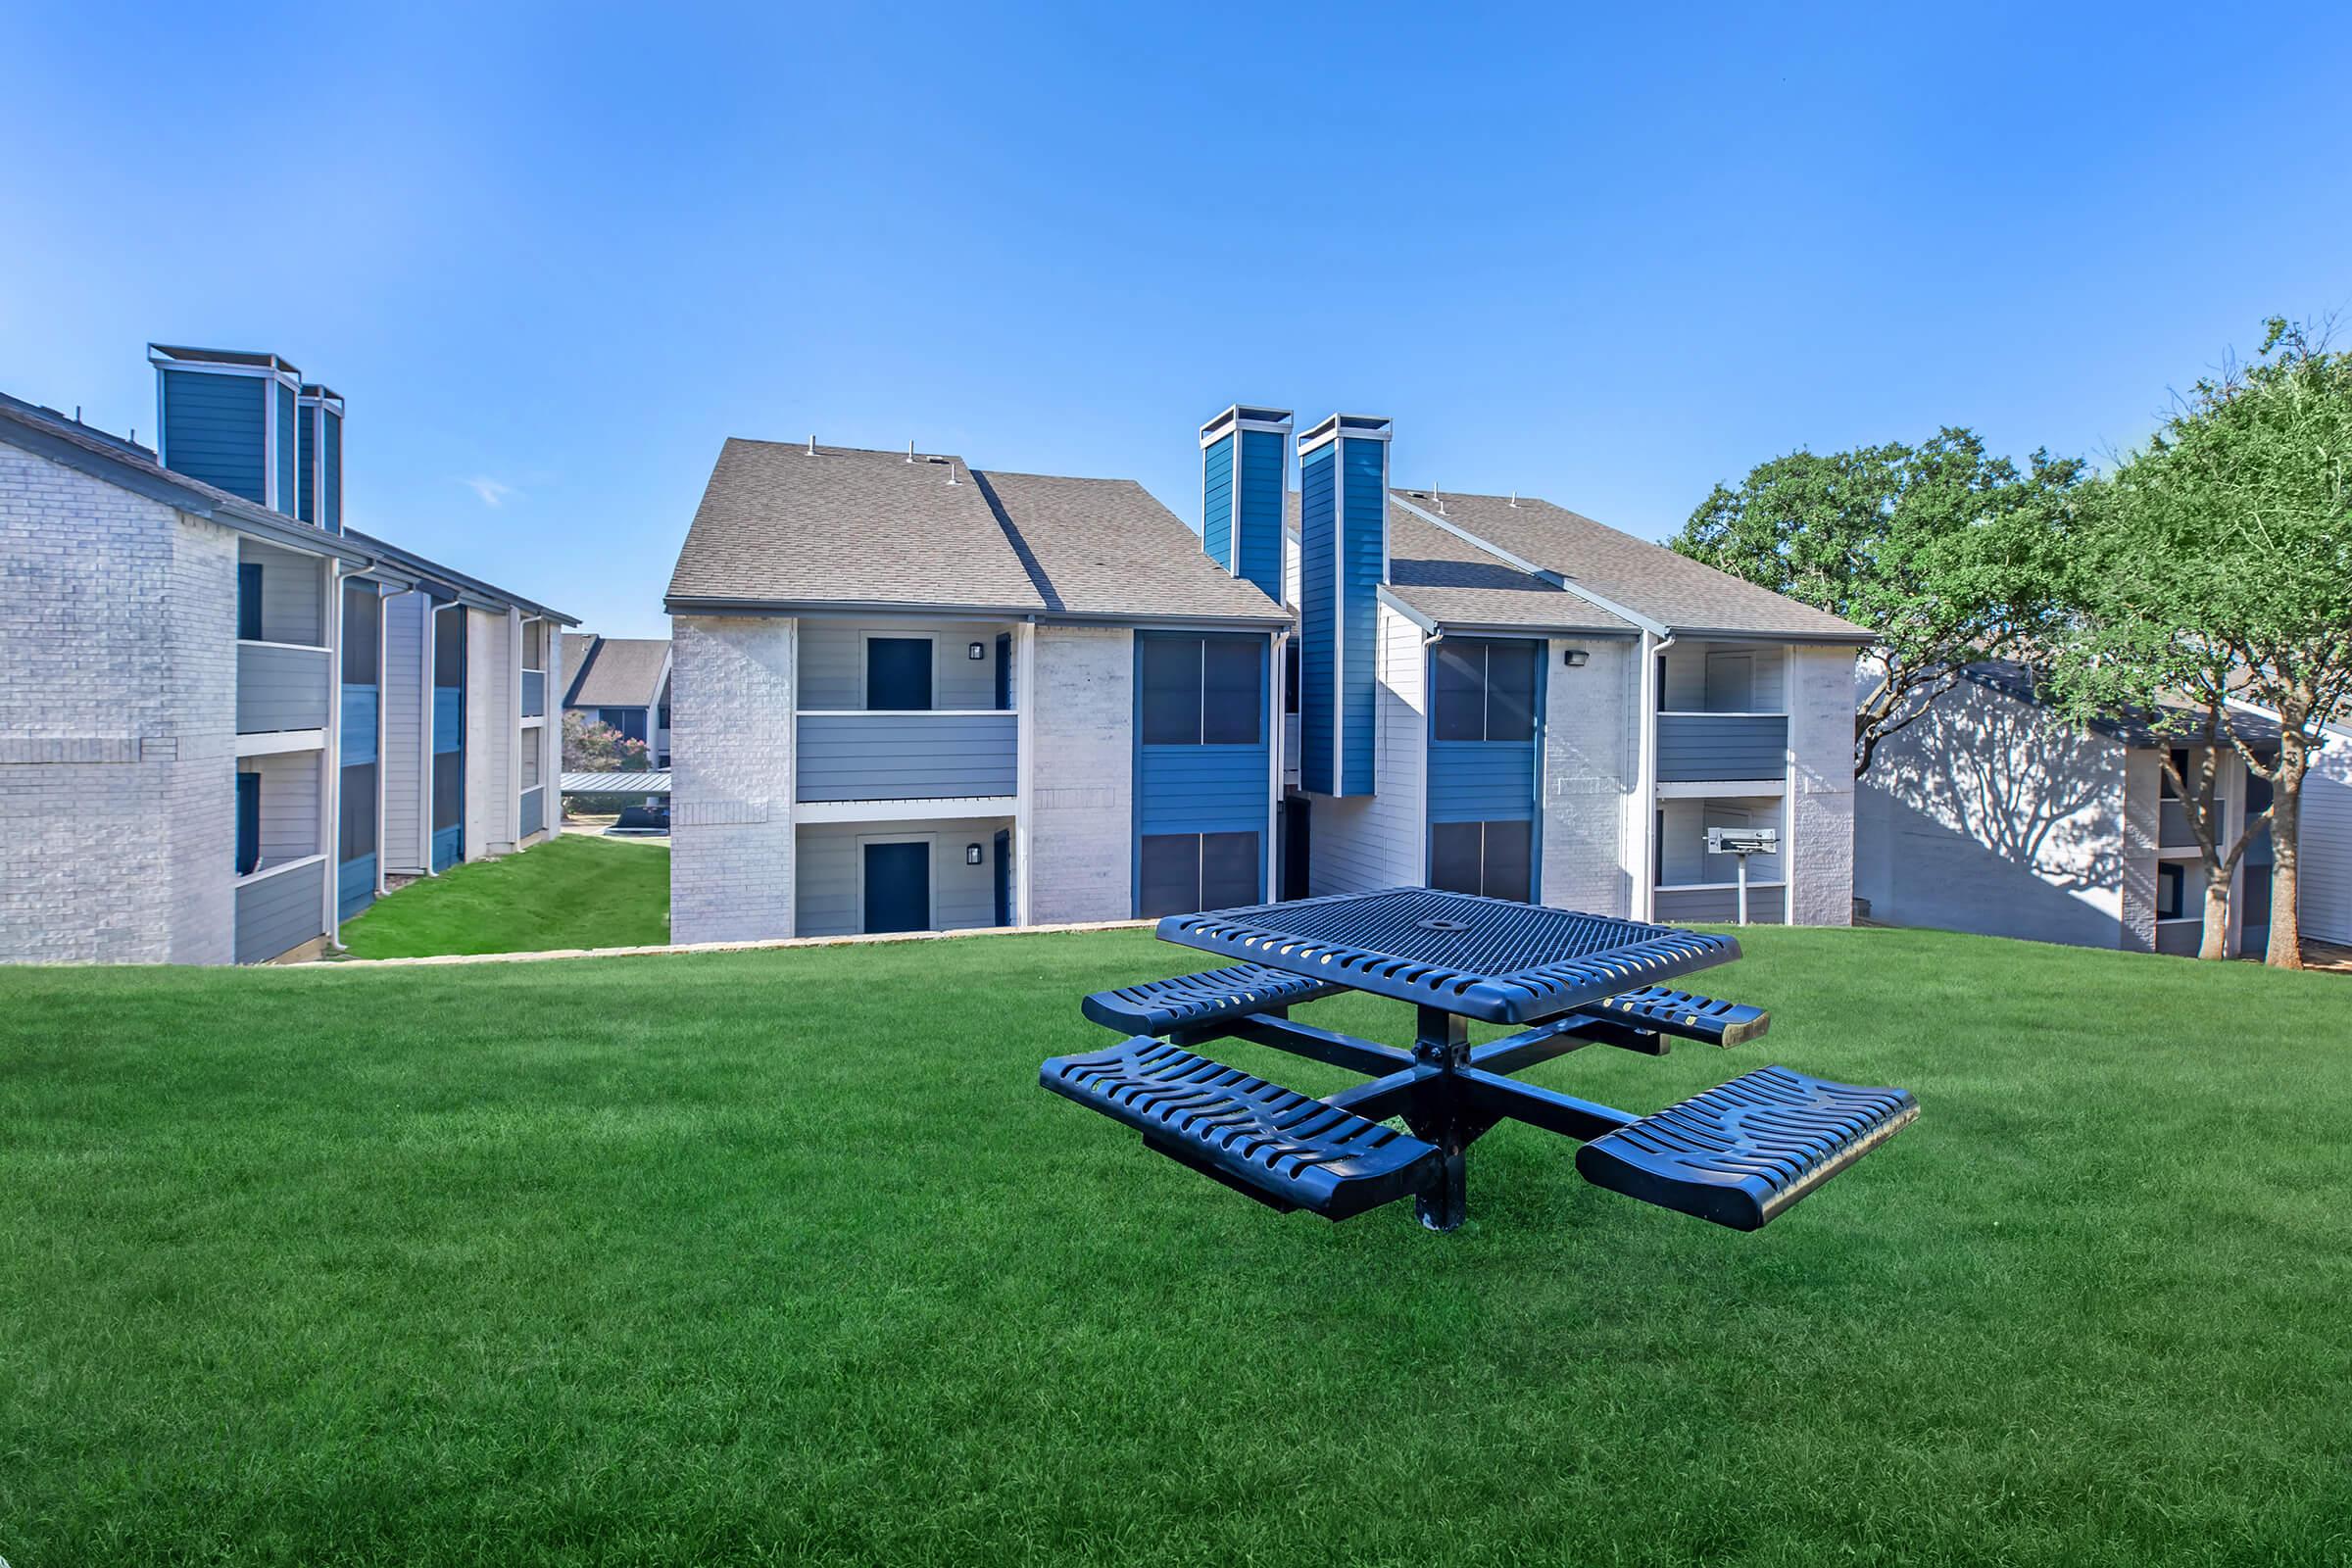 Blue square table with four benches sitting on grass overlooking Bedford, TX apartments	